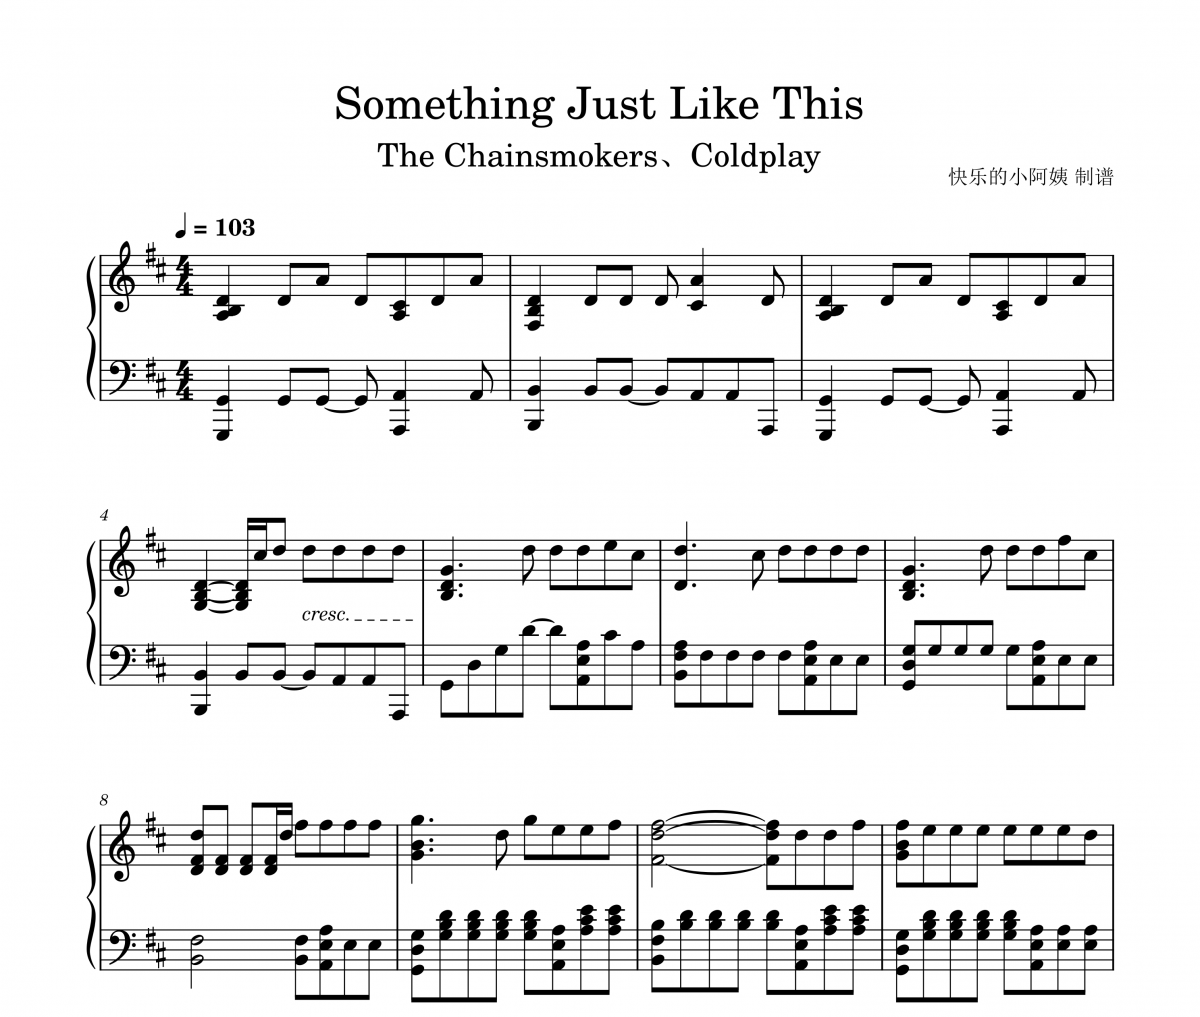 The Chainsmokers&Coldplay-Something Just Like This钢琴谱